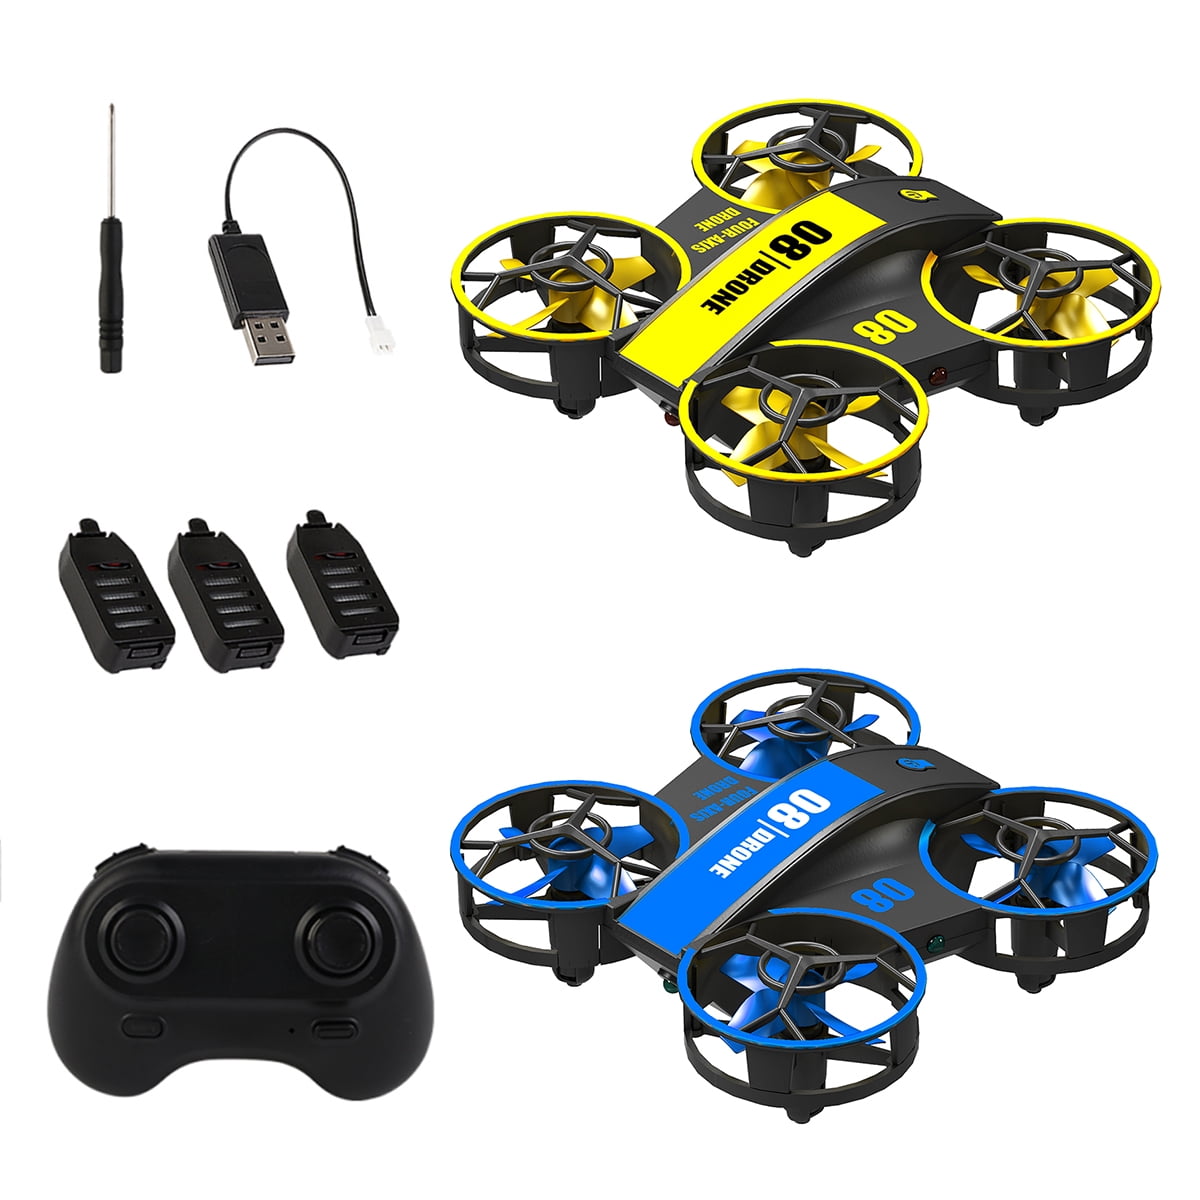 Mini Drone Small Pocket Drone Quadcopter 3D Roll Helicopter Kids Remote Control